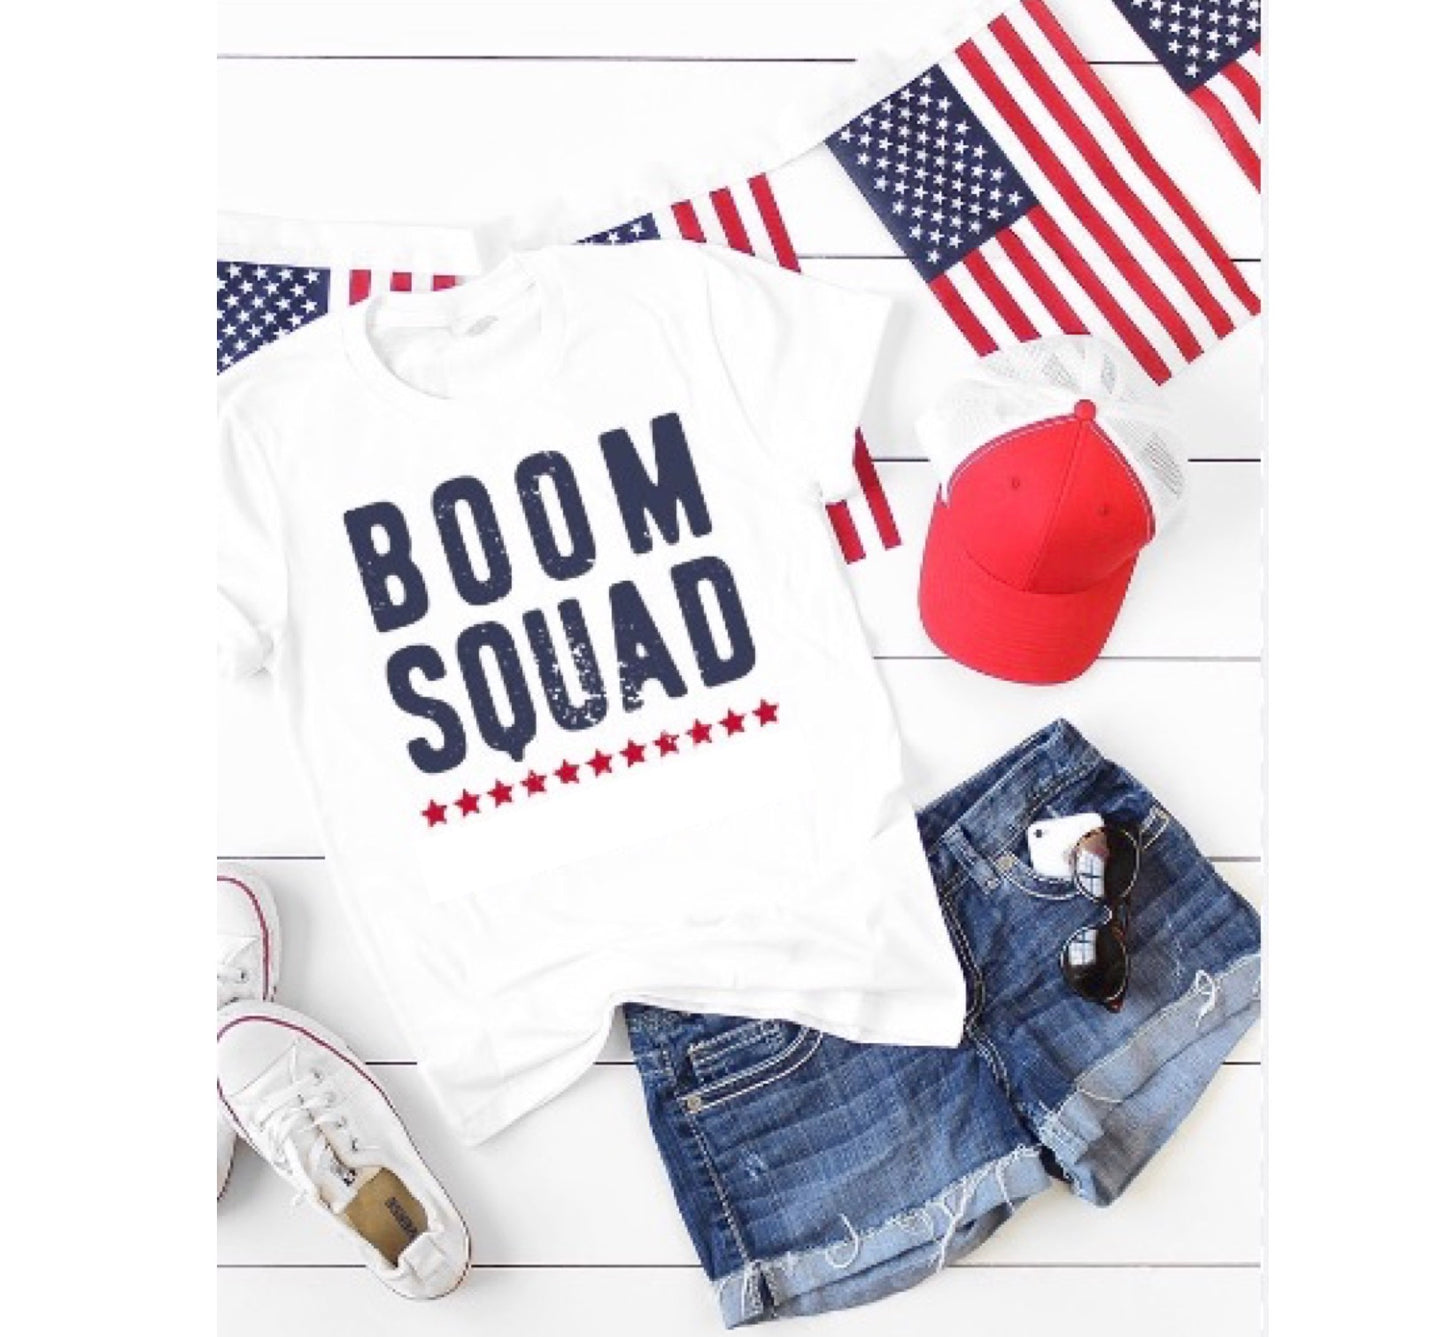 Boom Squad T-Shirt — 4th of July Special (FREE Shipping)